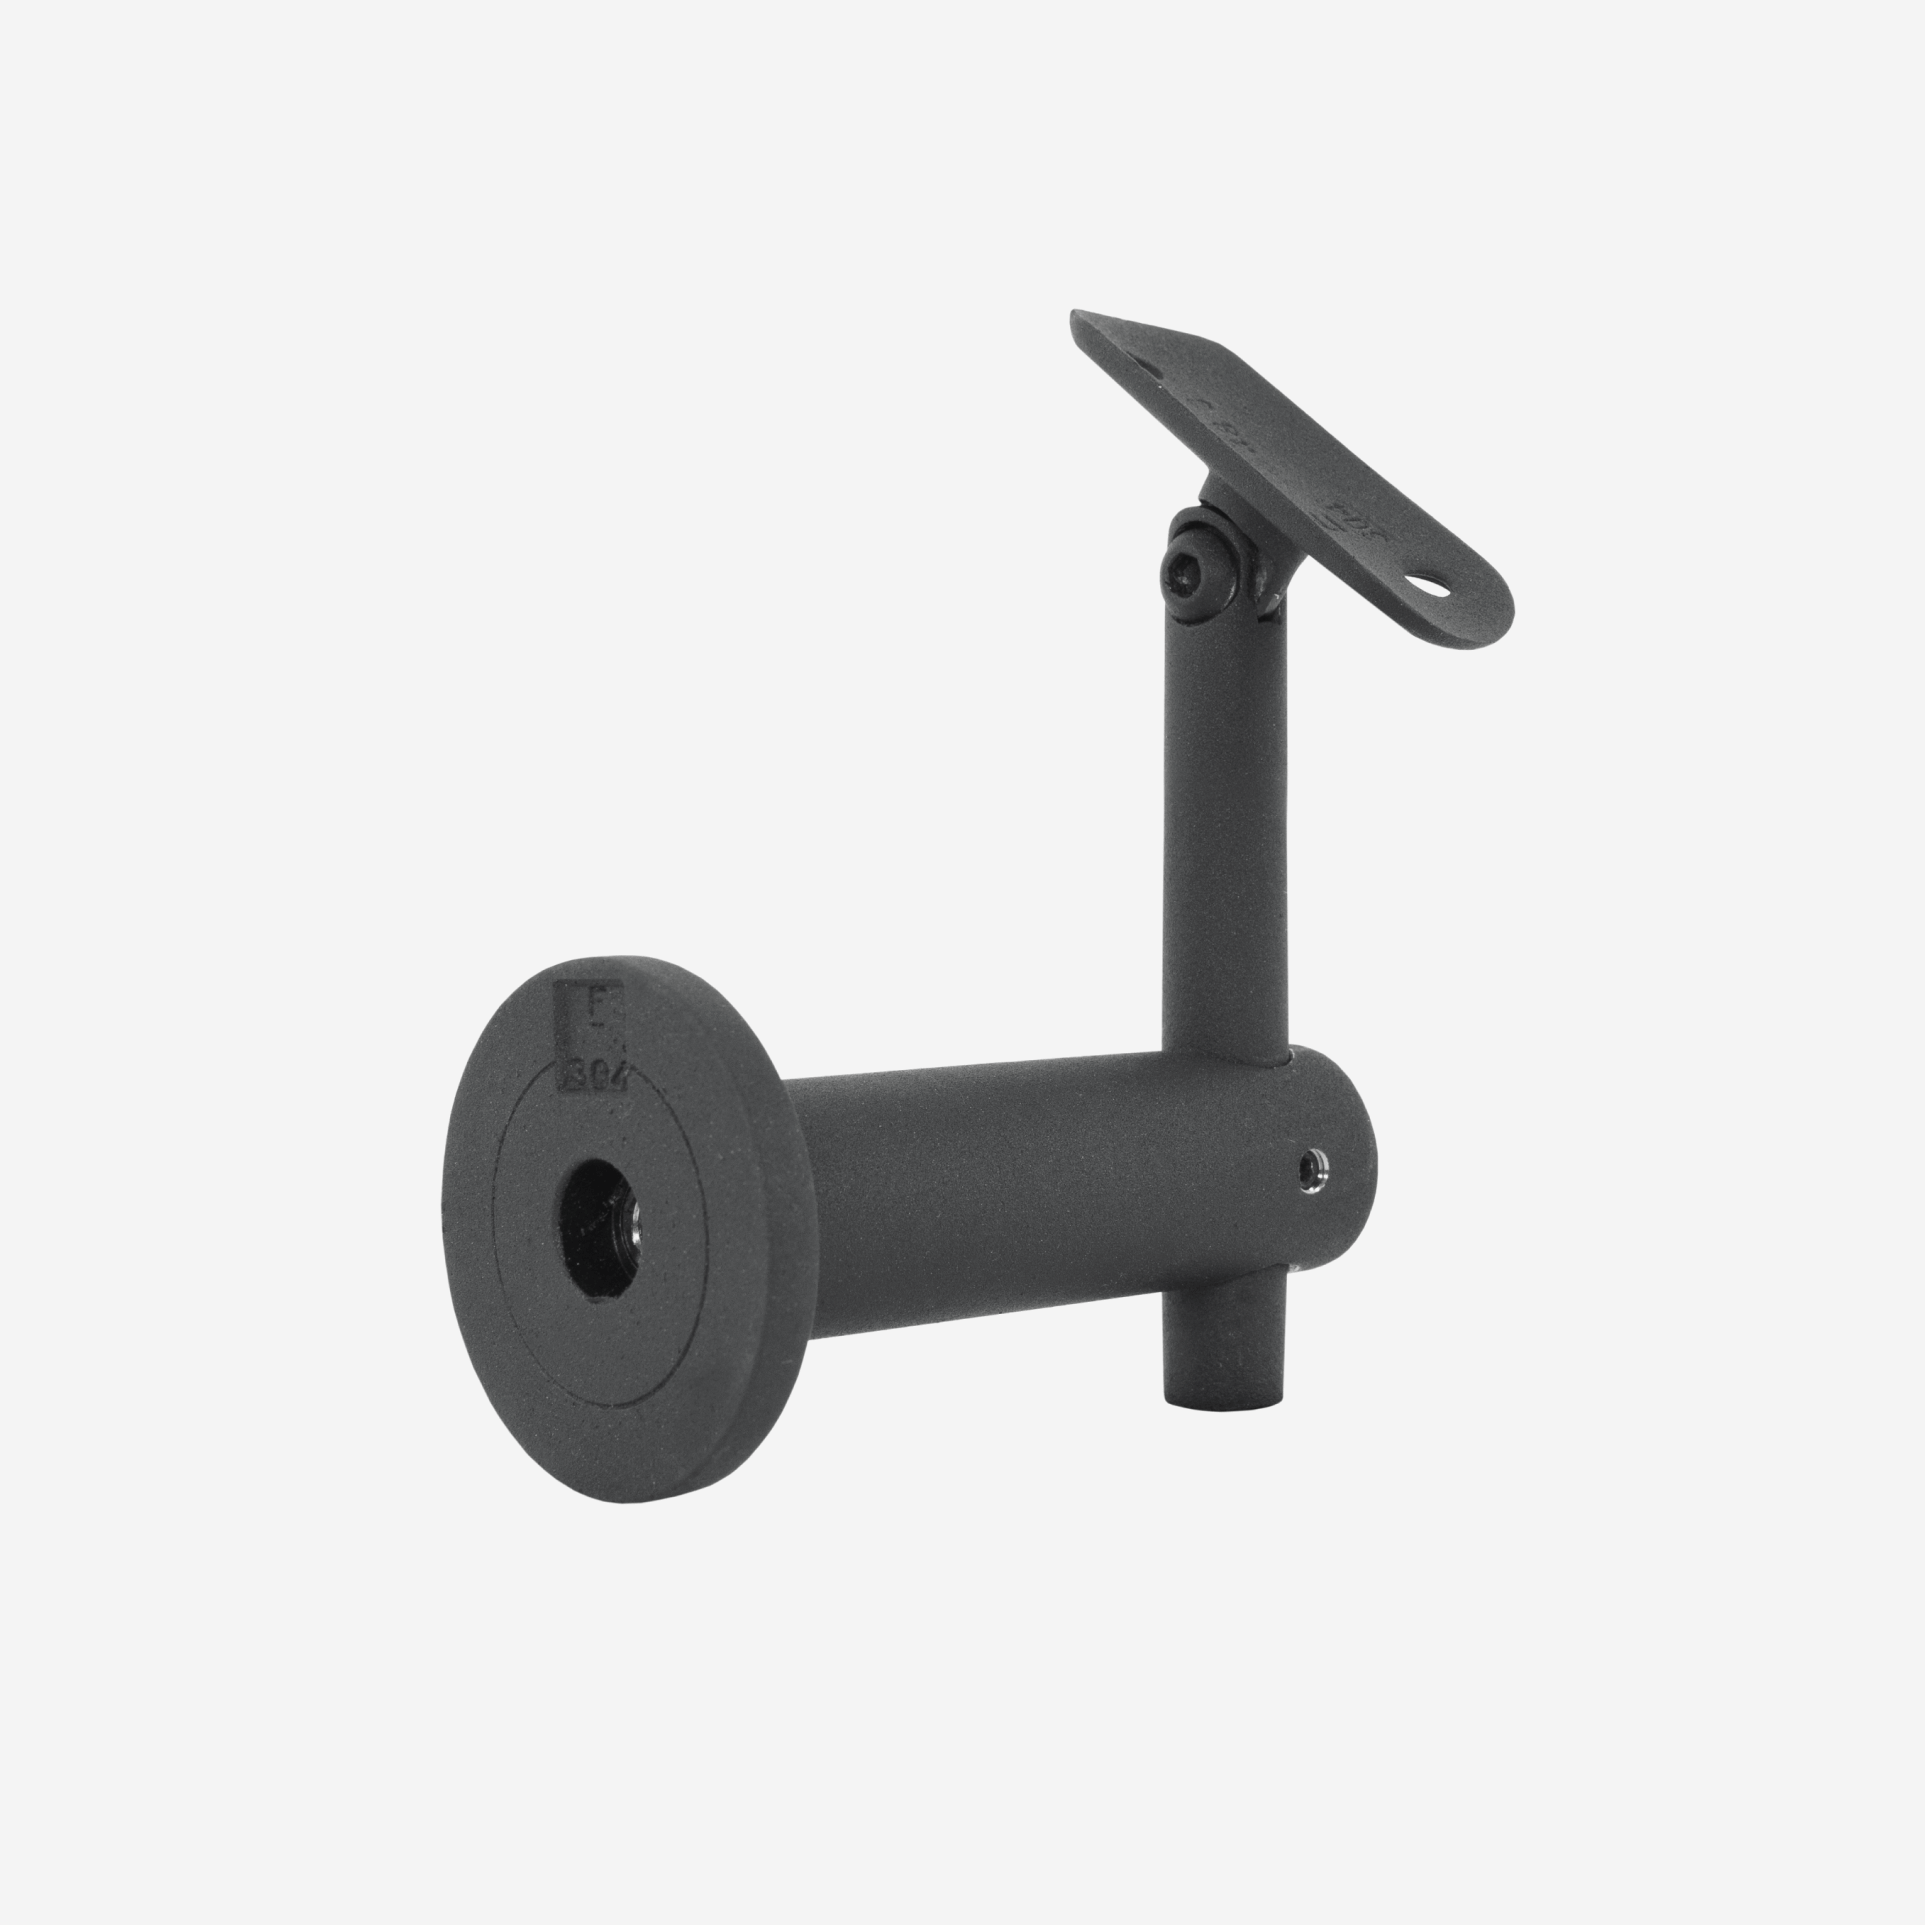 CG Matte Black Wall Mounted Handrail Bracket with Round Handrail Adapter Plate